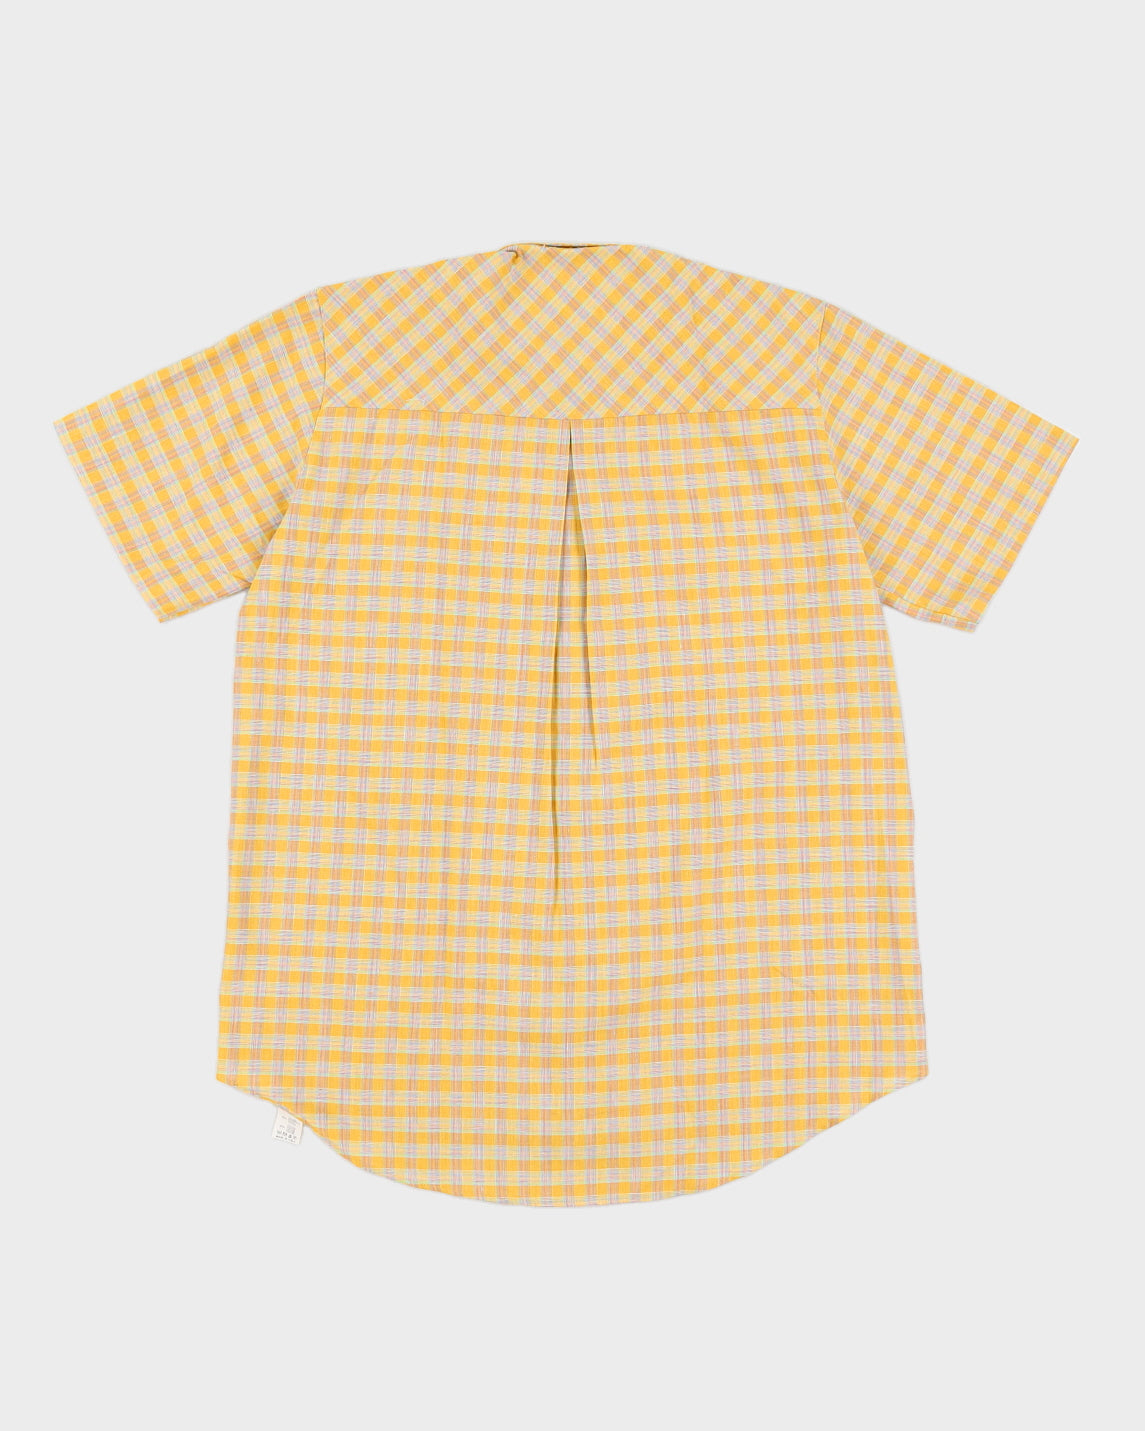 Vintage 70s Benetton Yellow Checked Short Sleeved Shirt Deadstock With Tags - XL